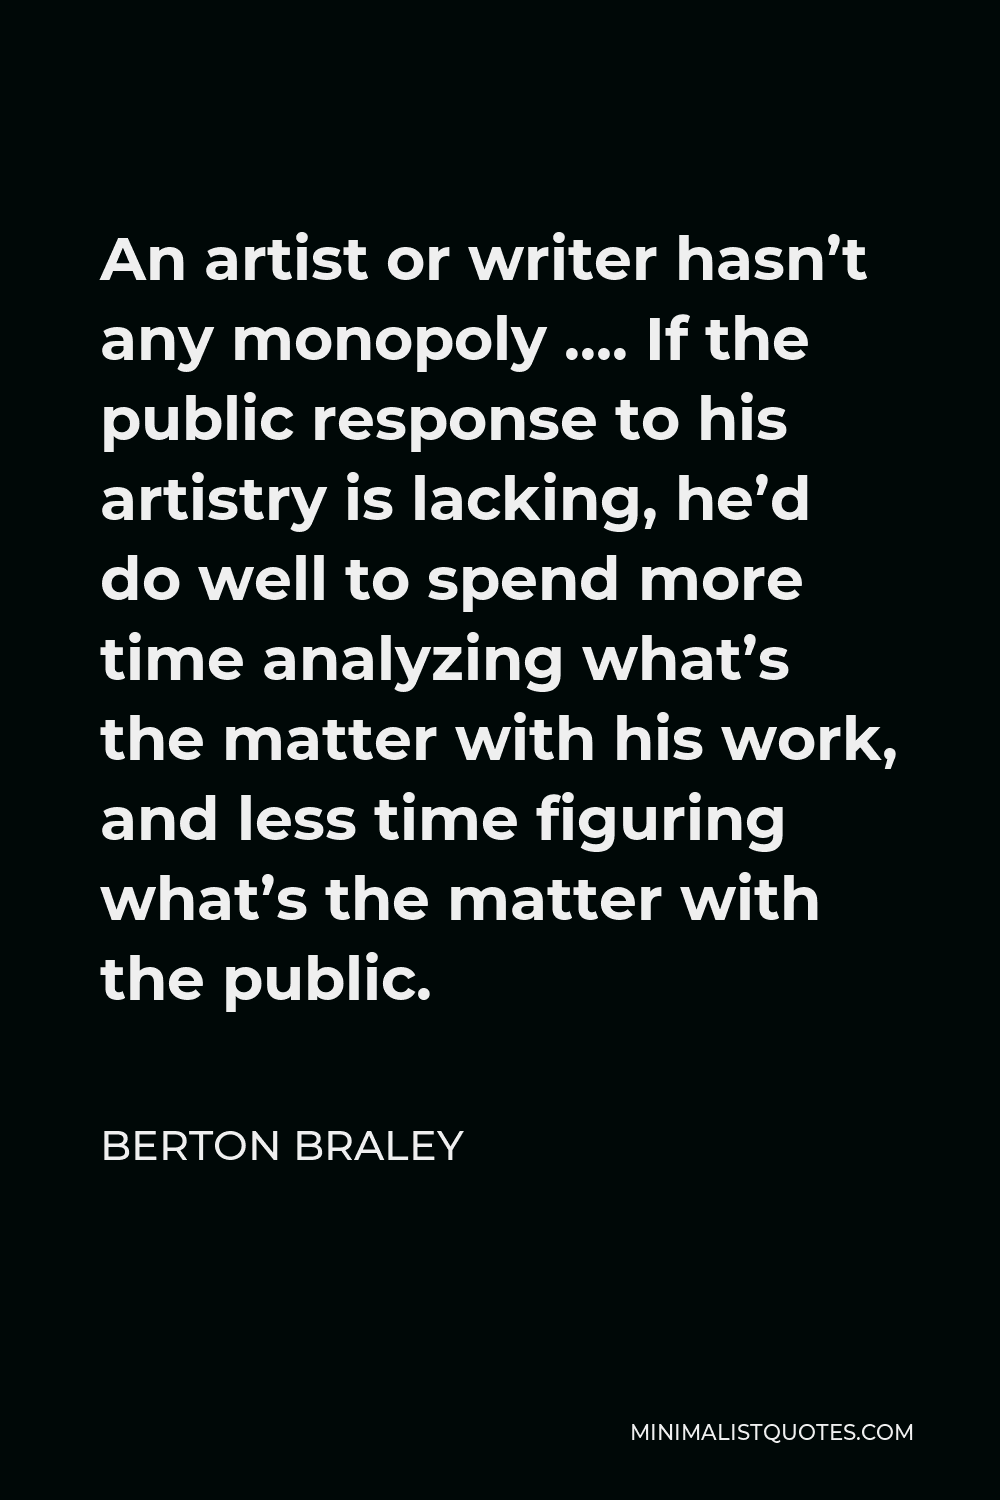 Berton Braley Quote - An artist or writer hasn’t any monopoly …. If the public response to his artistry is lacking, he’d do well to spend more time analyzing what’s the matter with his work, and less time figuring what’s the matter with the public.